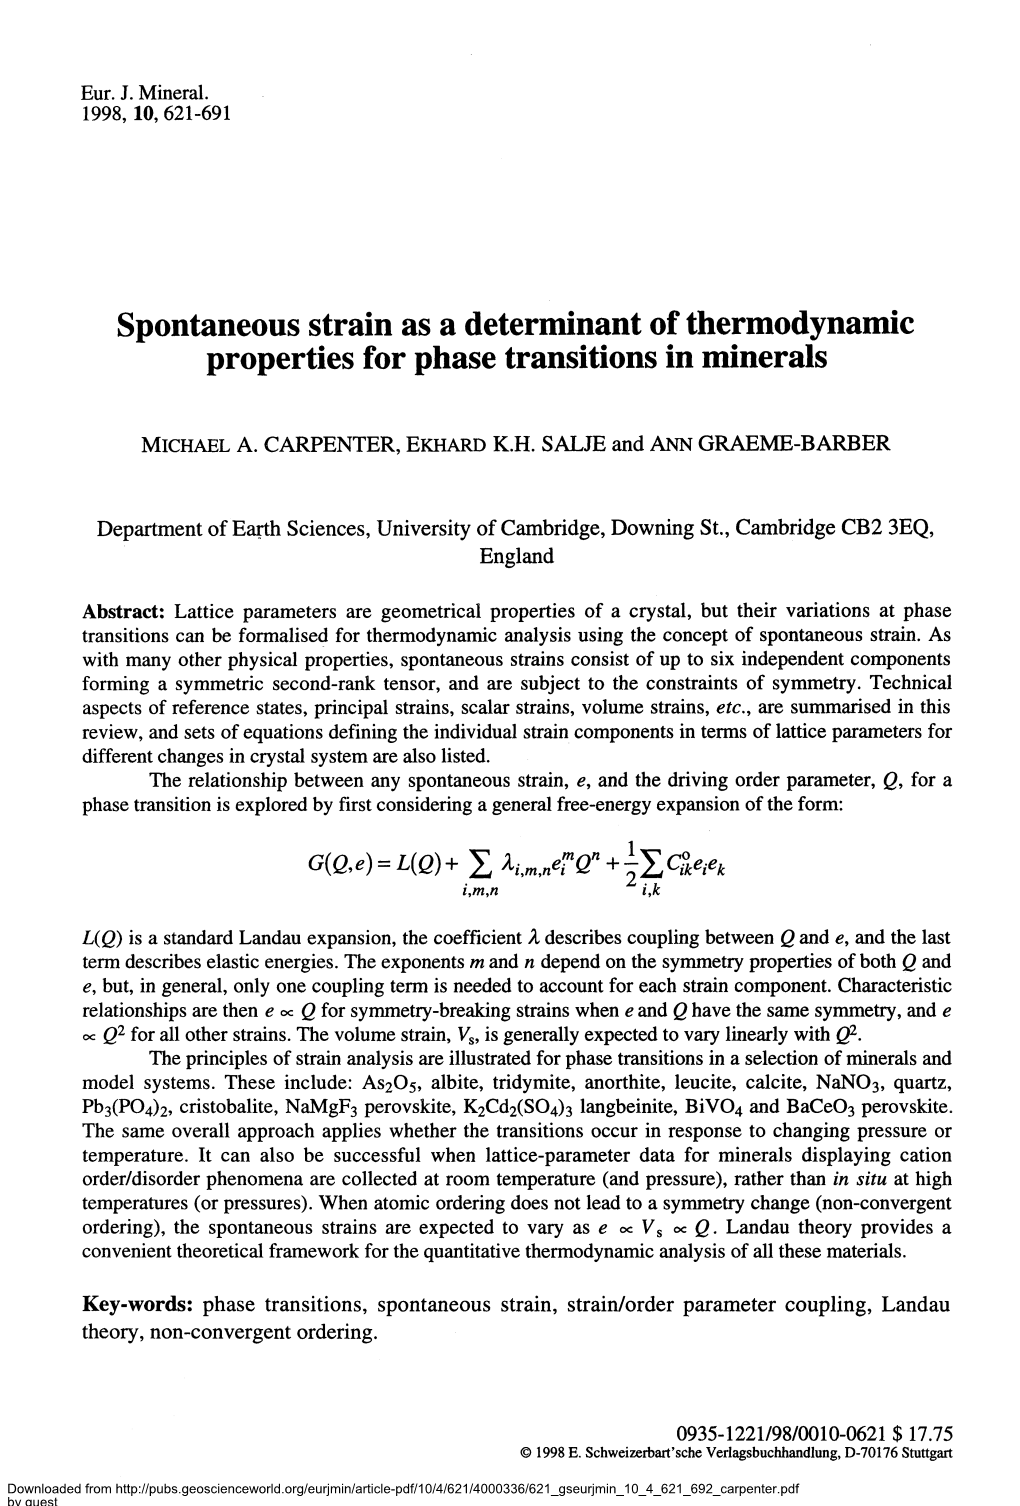 Spontaneous Strain As a Determinant of Thermodynamic Properties for Phase Transitions in Minerals